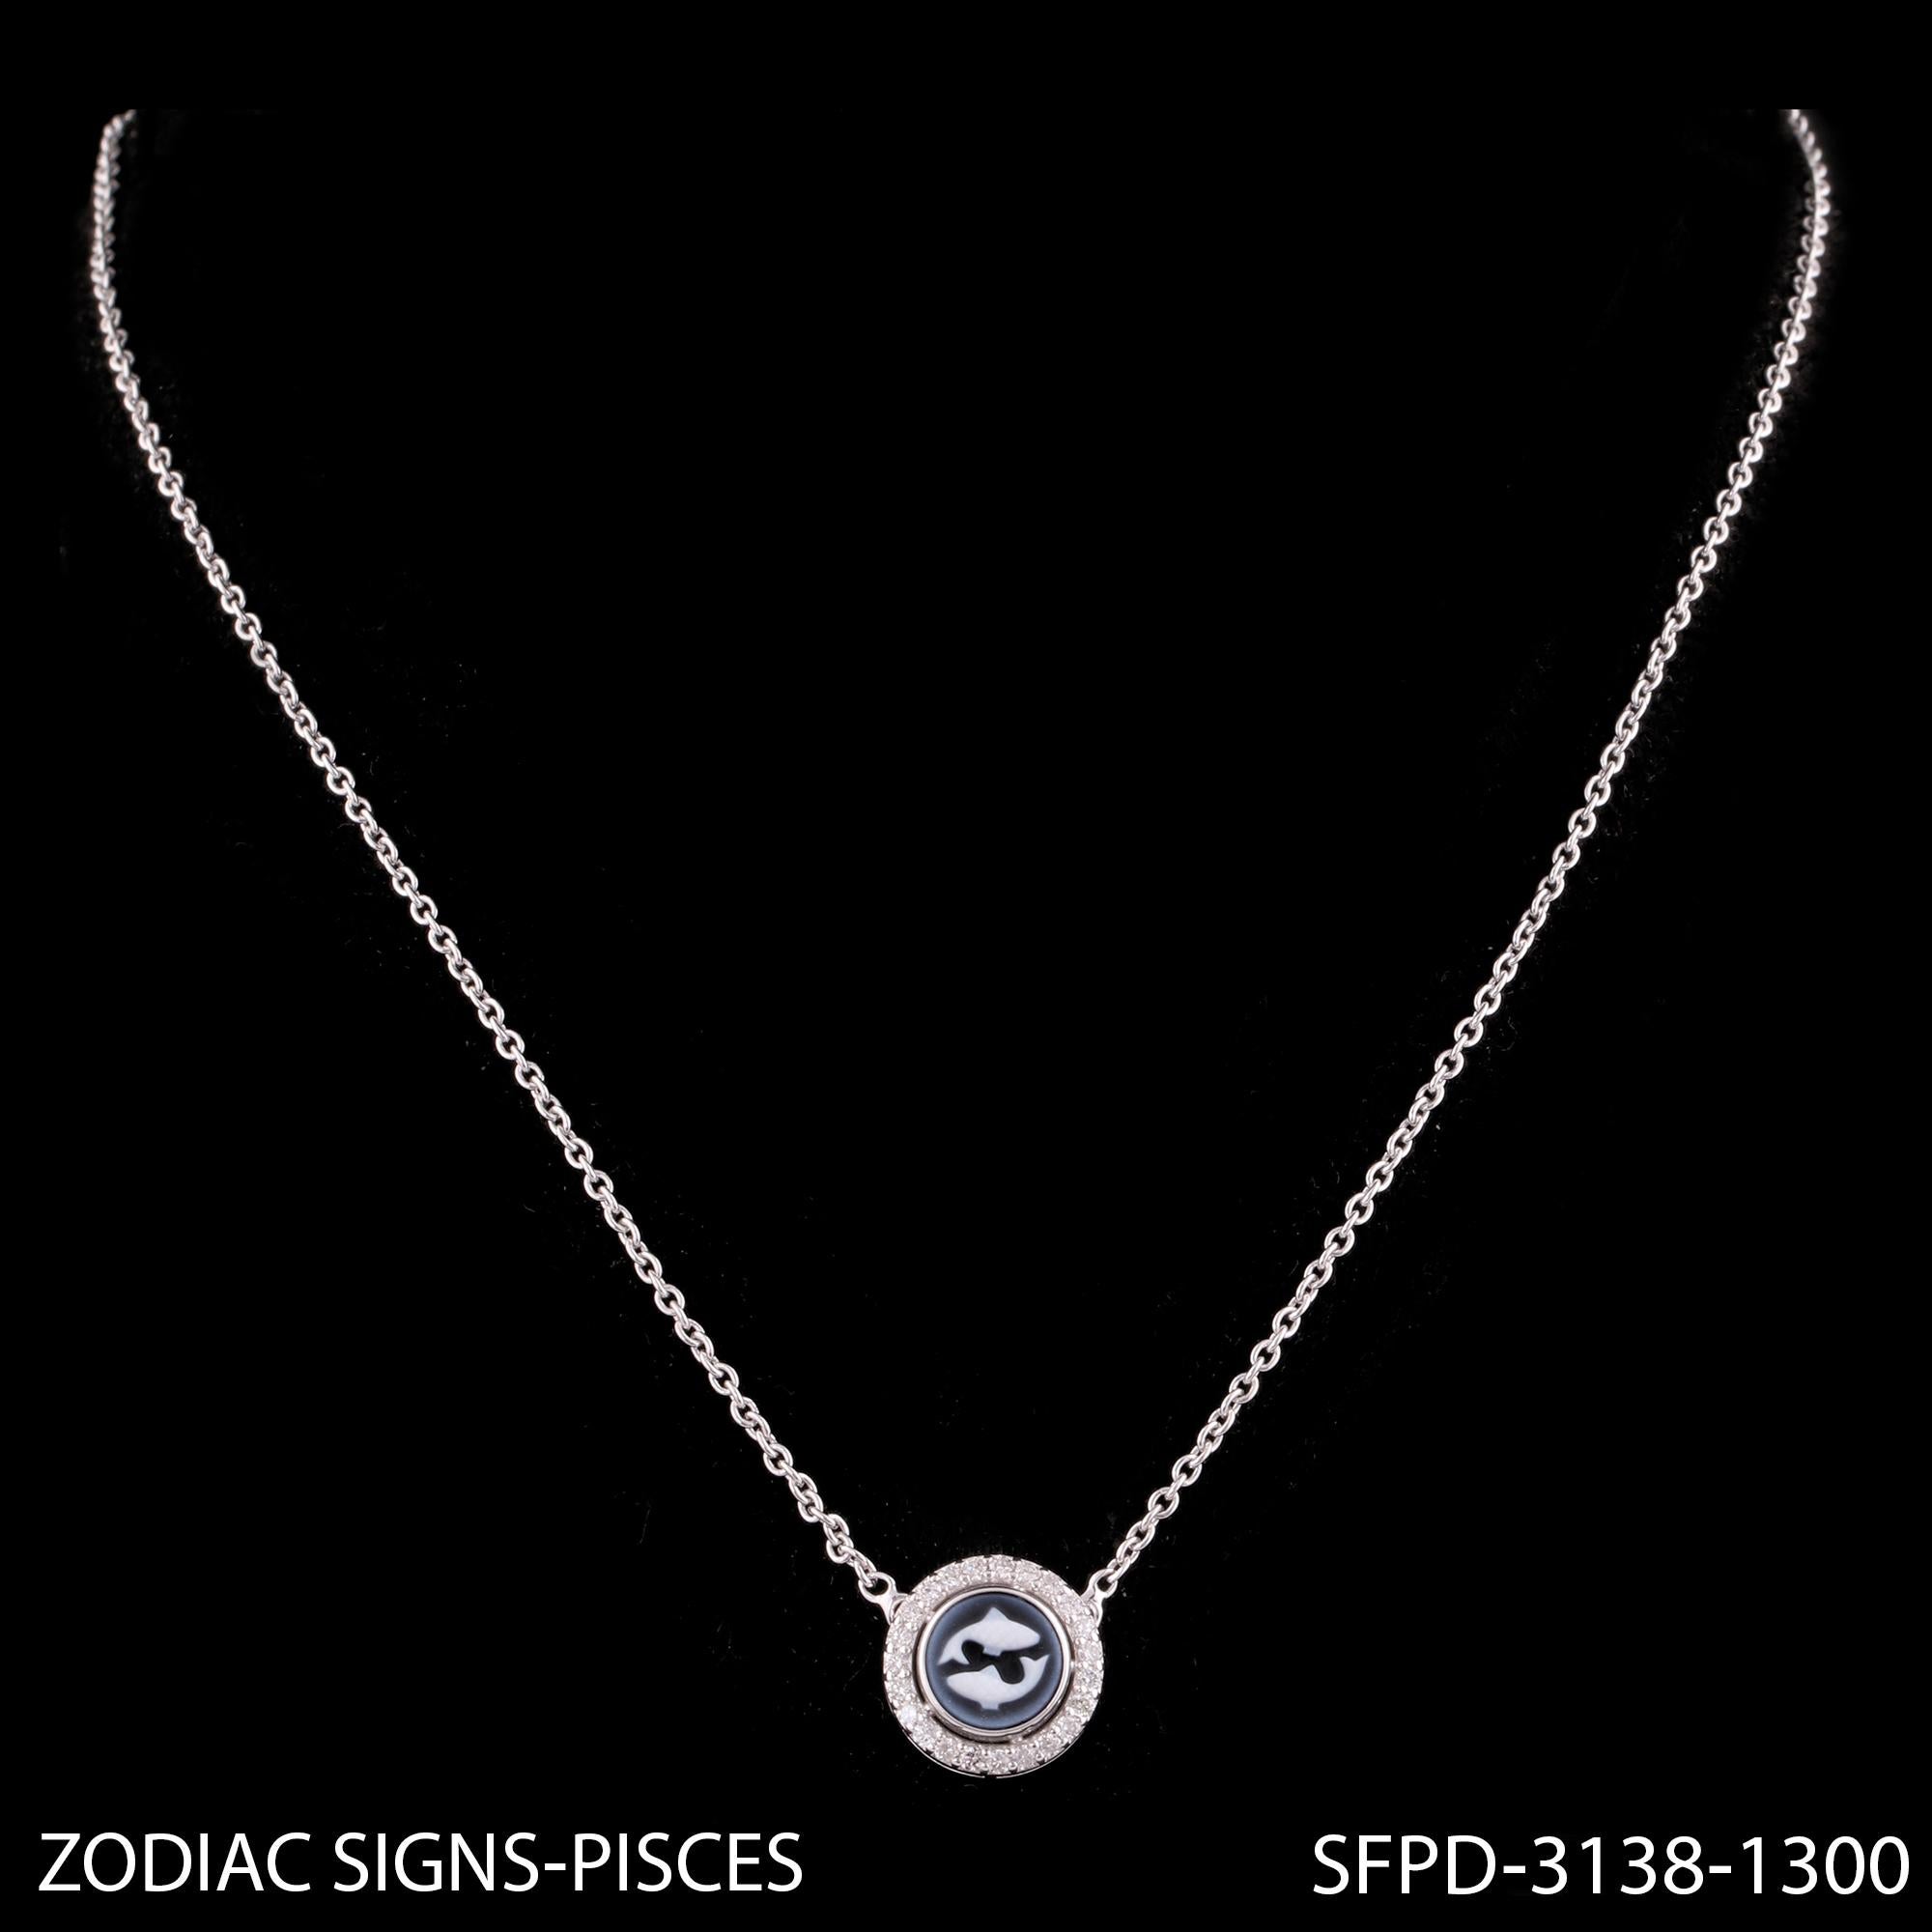 Modern Pisces Zodiac Sign H/SI Diamond Astrological Pendant 14k White Gold Necklace For Sale